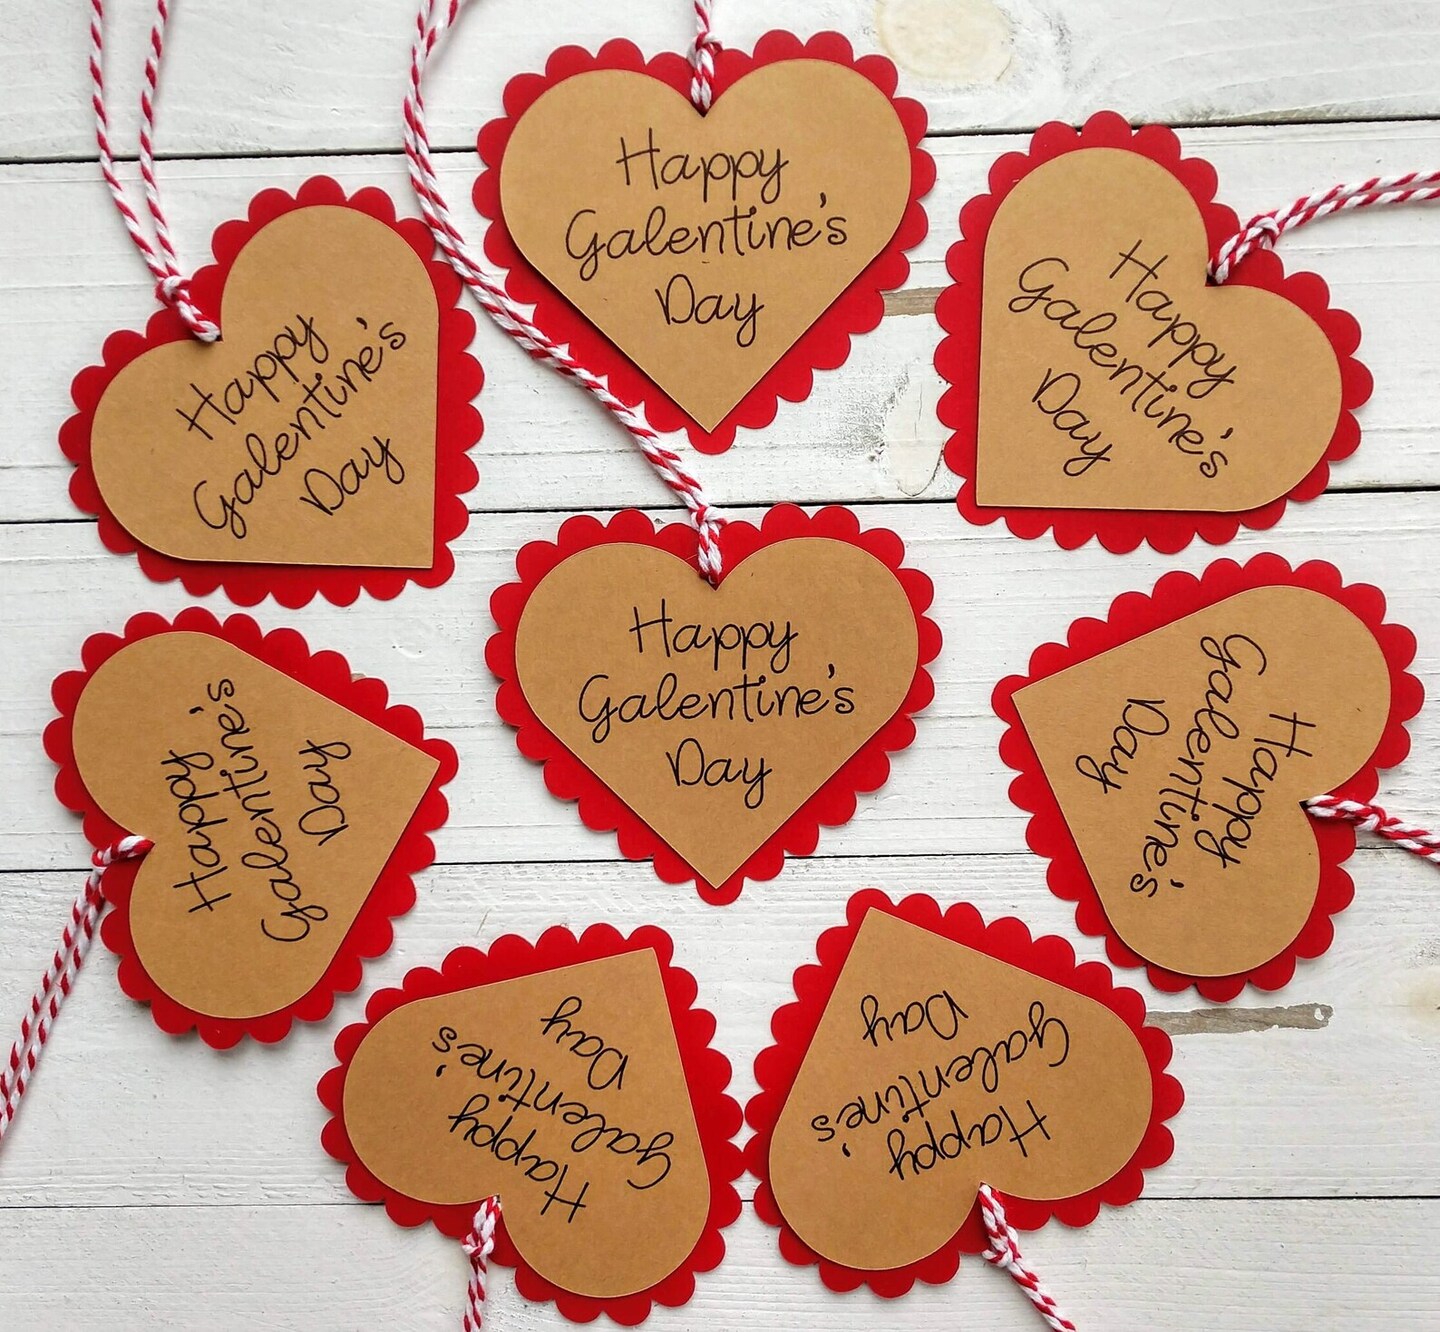 10 Best Valentine's (or Galentine's) Day Gifts to Give This Year!